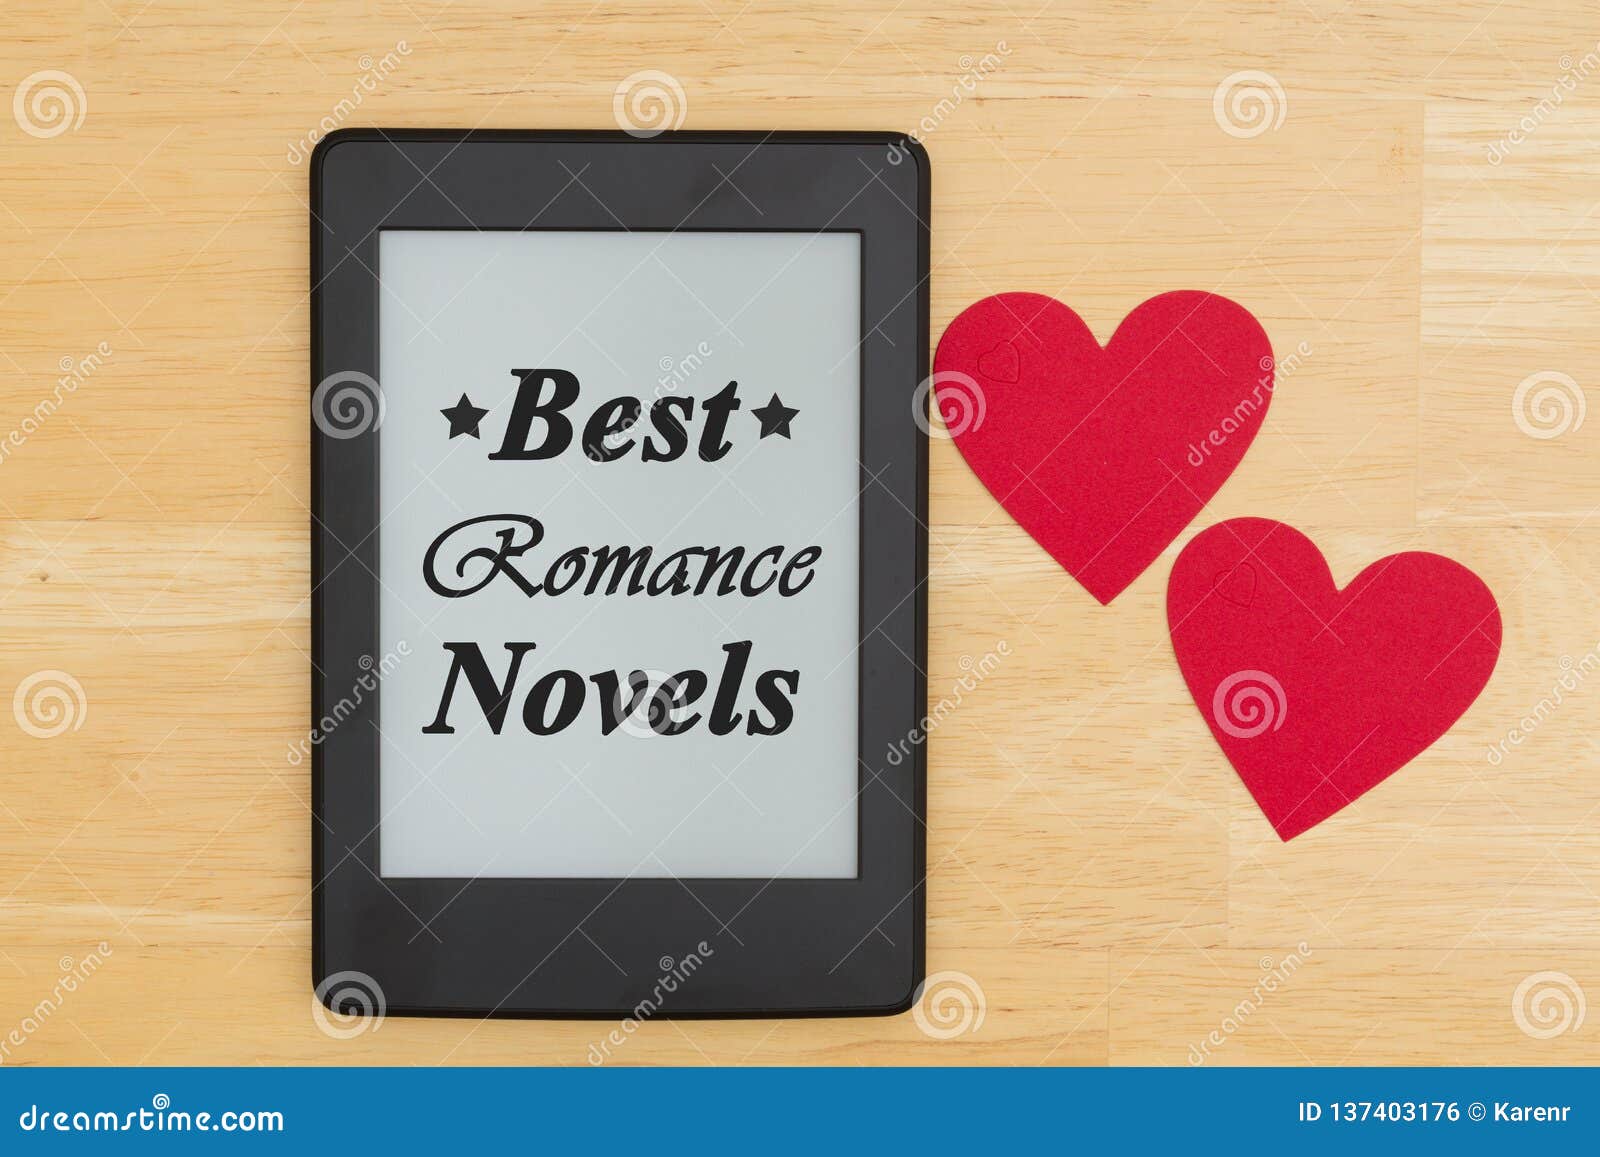 best romance novels text on an e-reader on a wood desk with two hearts